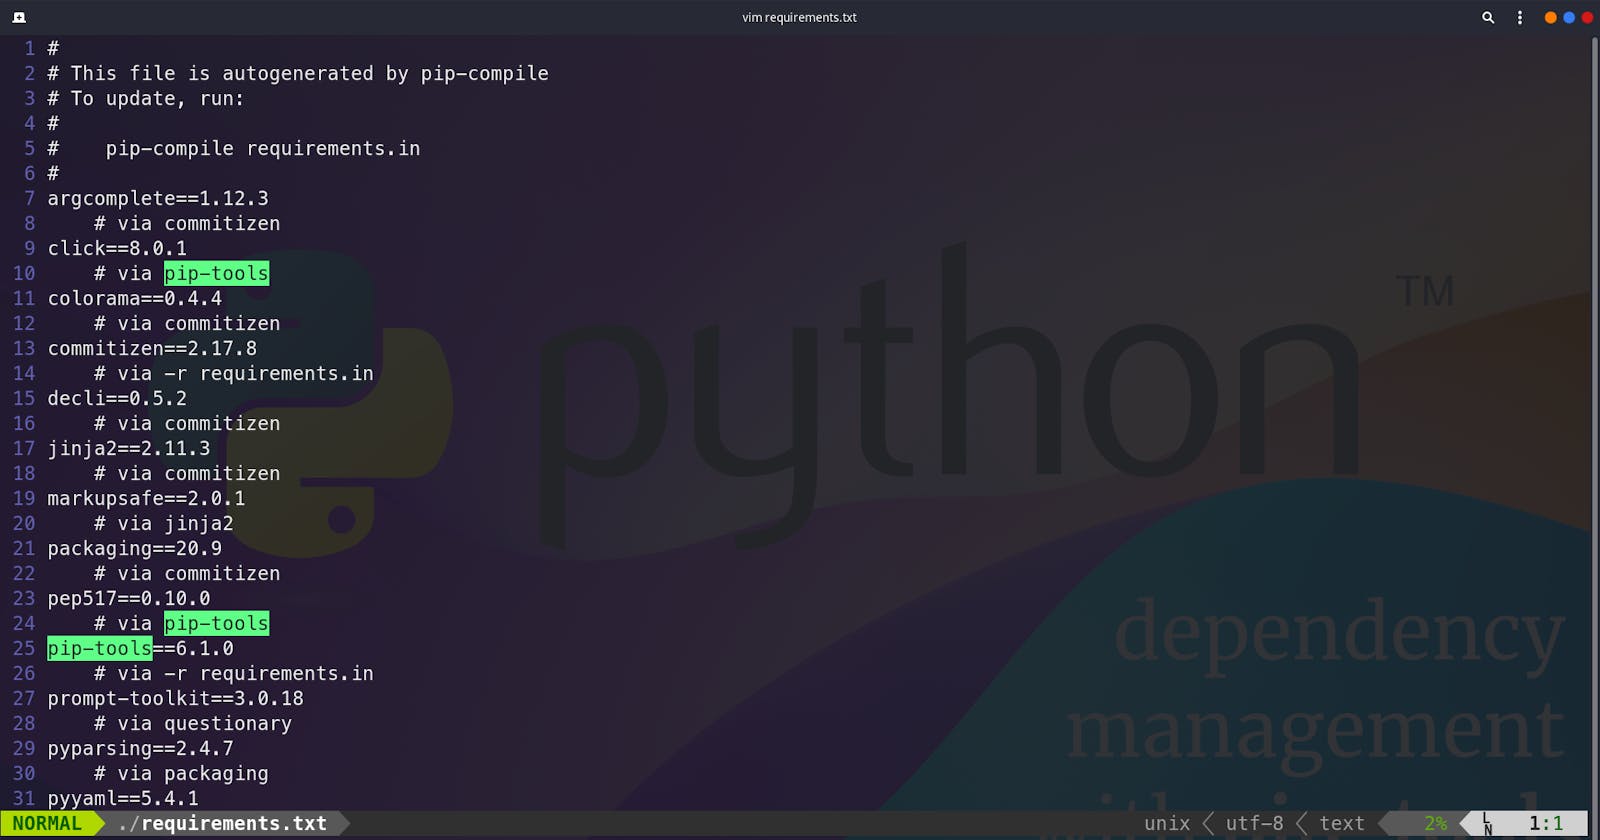 Python dependency management using pip-tools